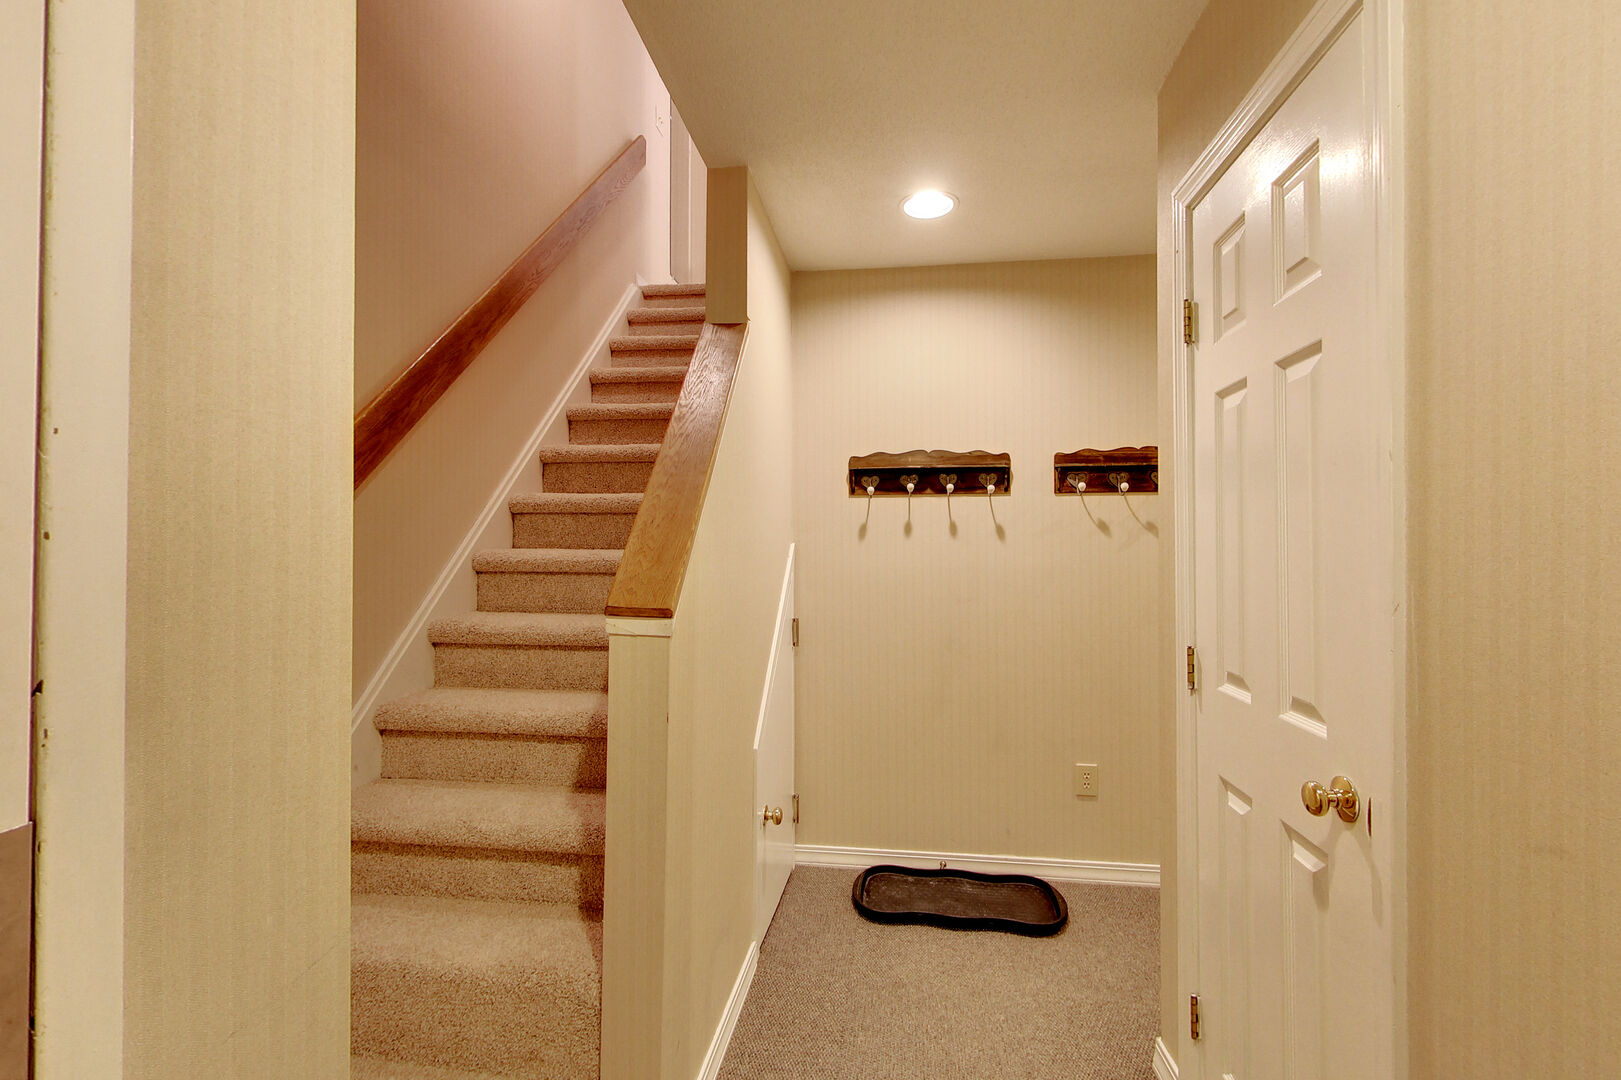 Hallway and stairs going to bedroom